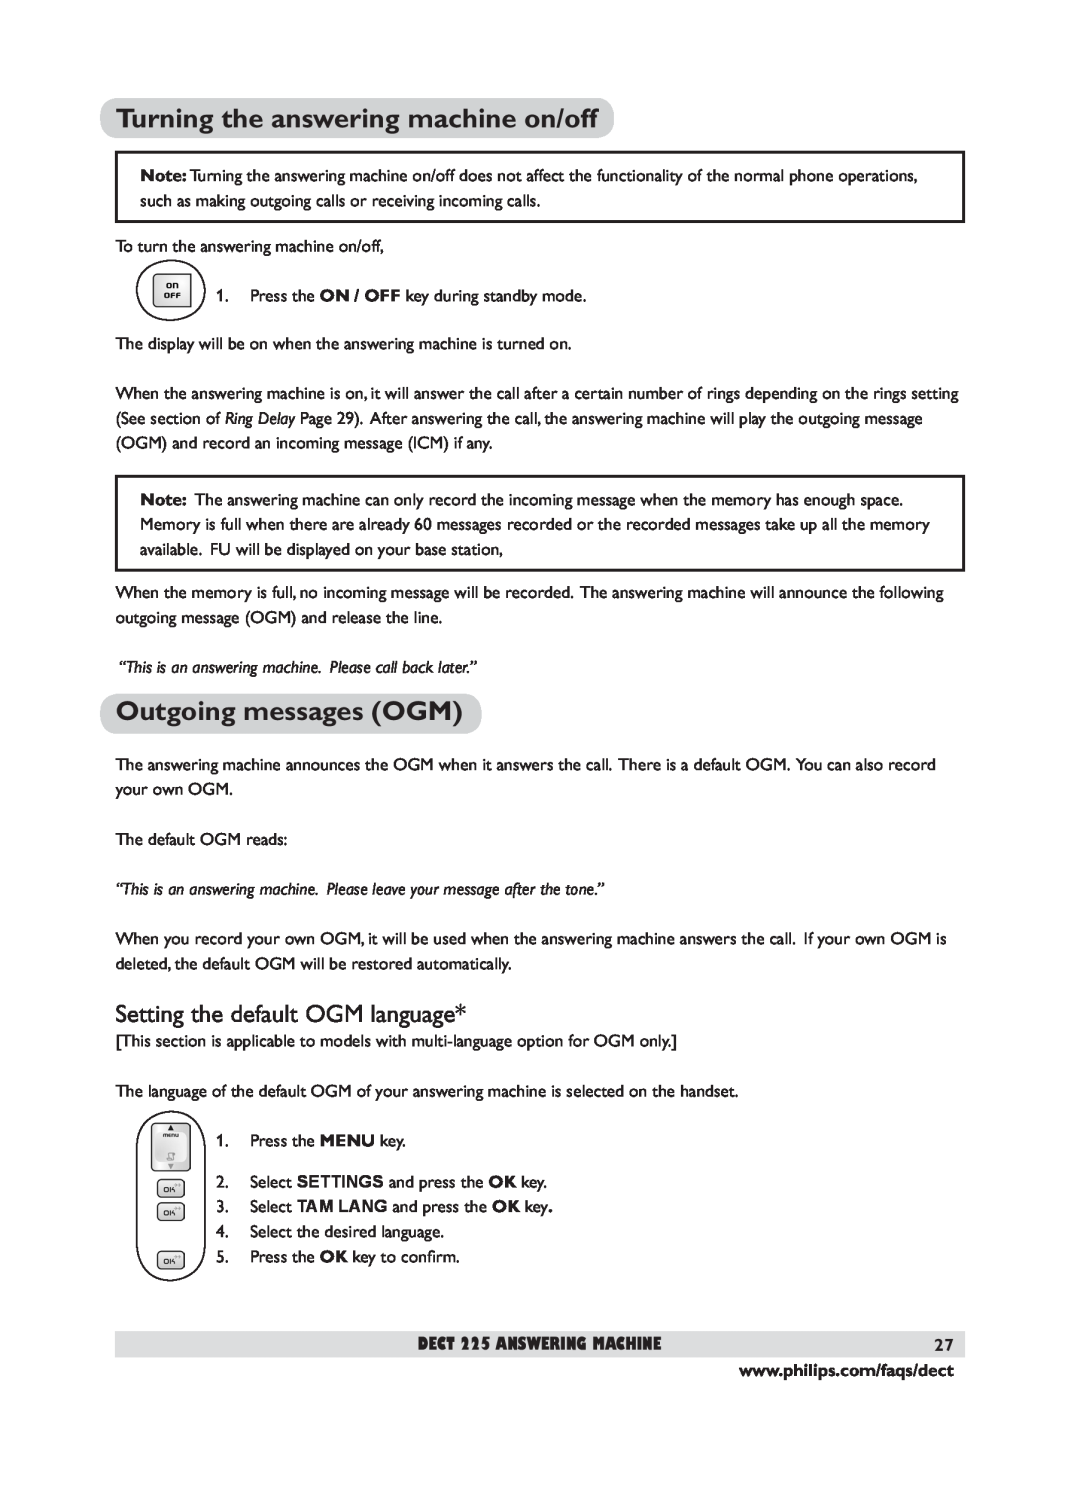 Philips DECT 221 user manual Turning the answering machine on/off, Outgoing messages OGM, Setting the default OGM language 